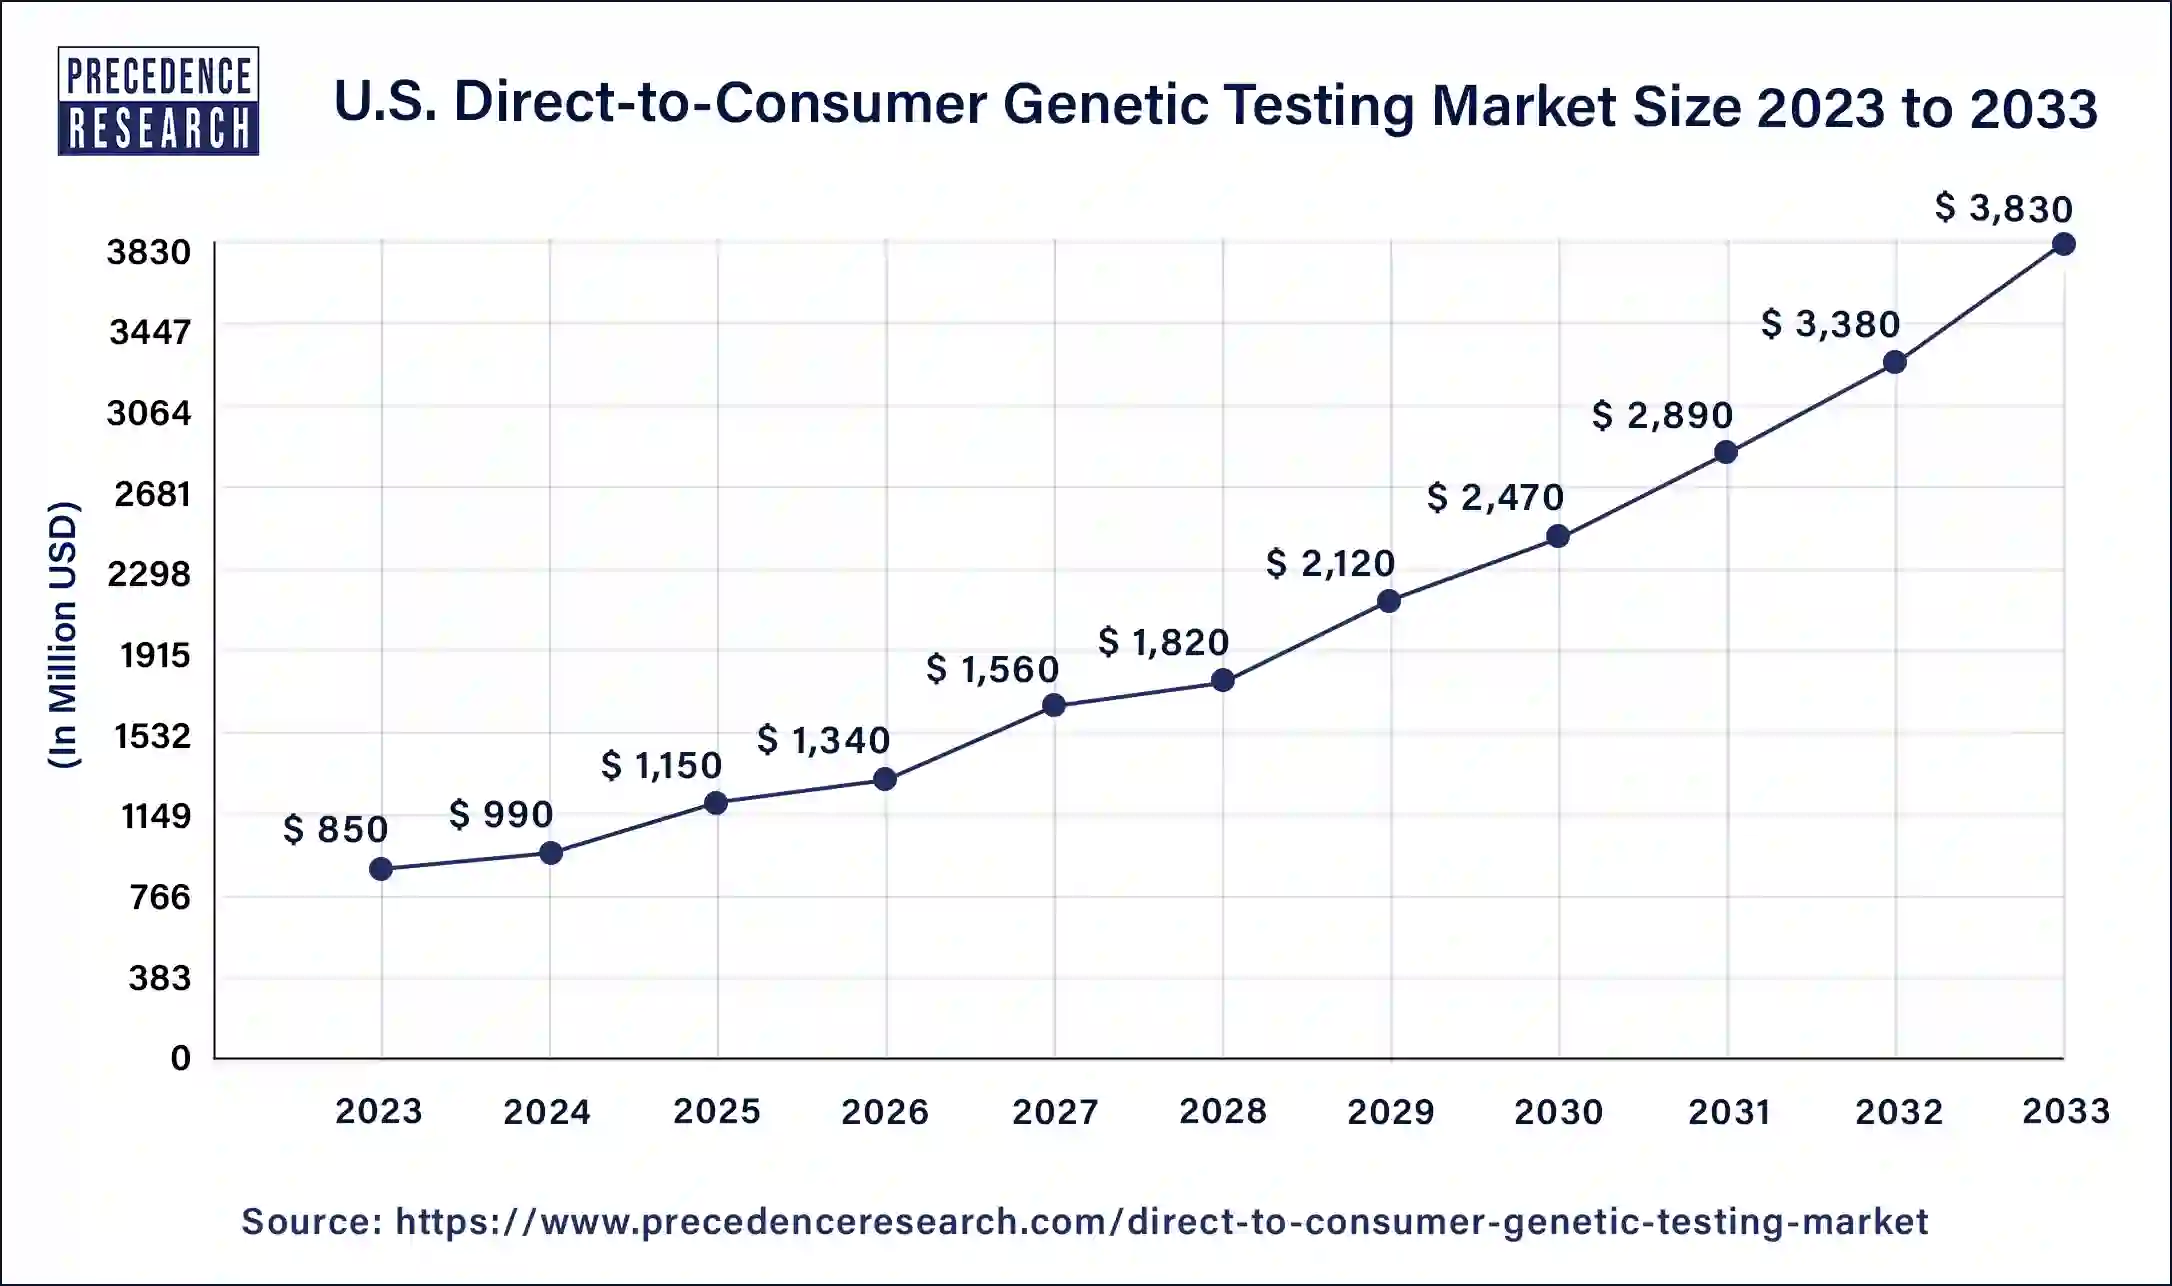 U.S. Direct-to-Consumer Genetic Testing Market Size 2024 to 2033